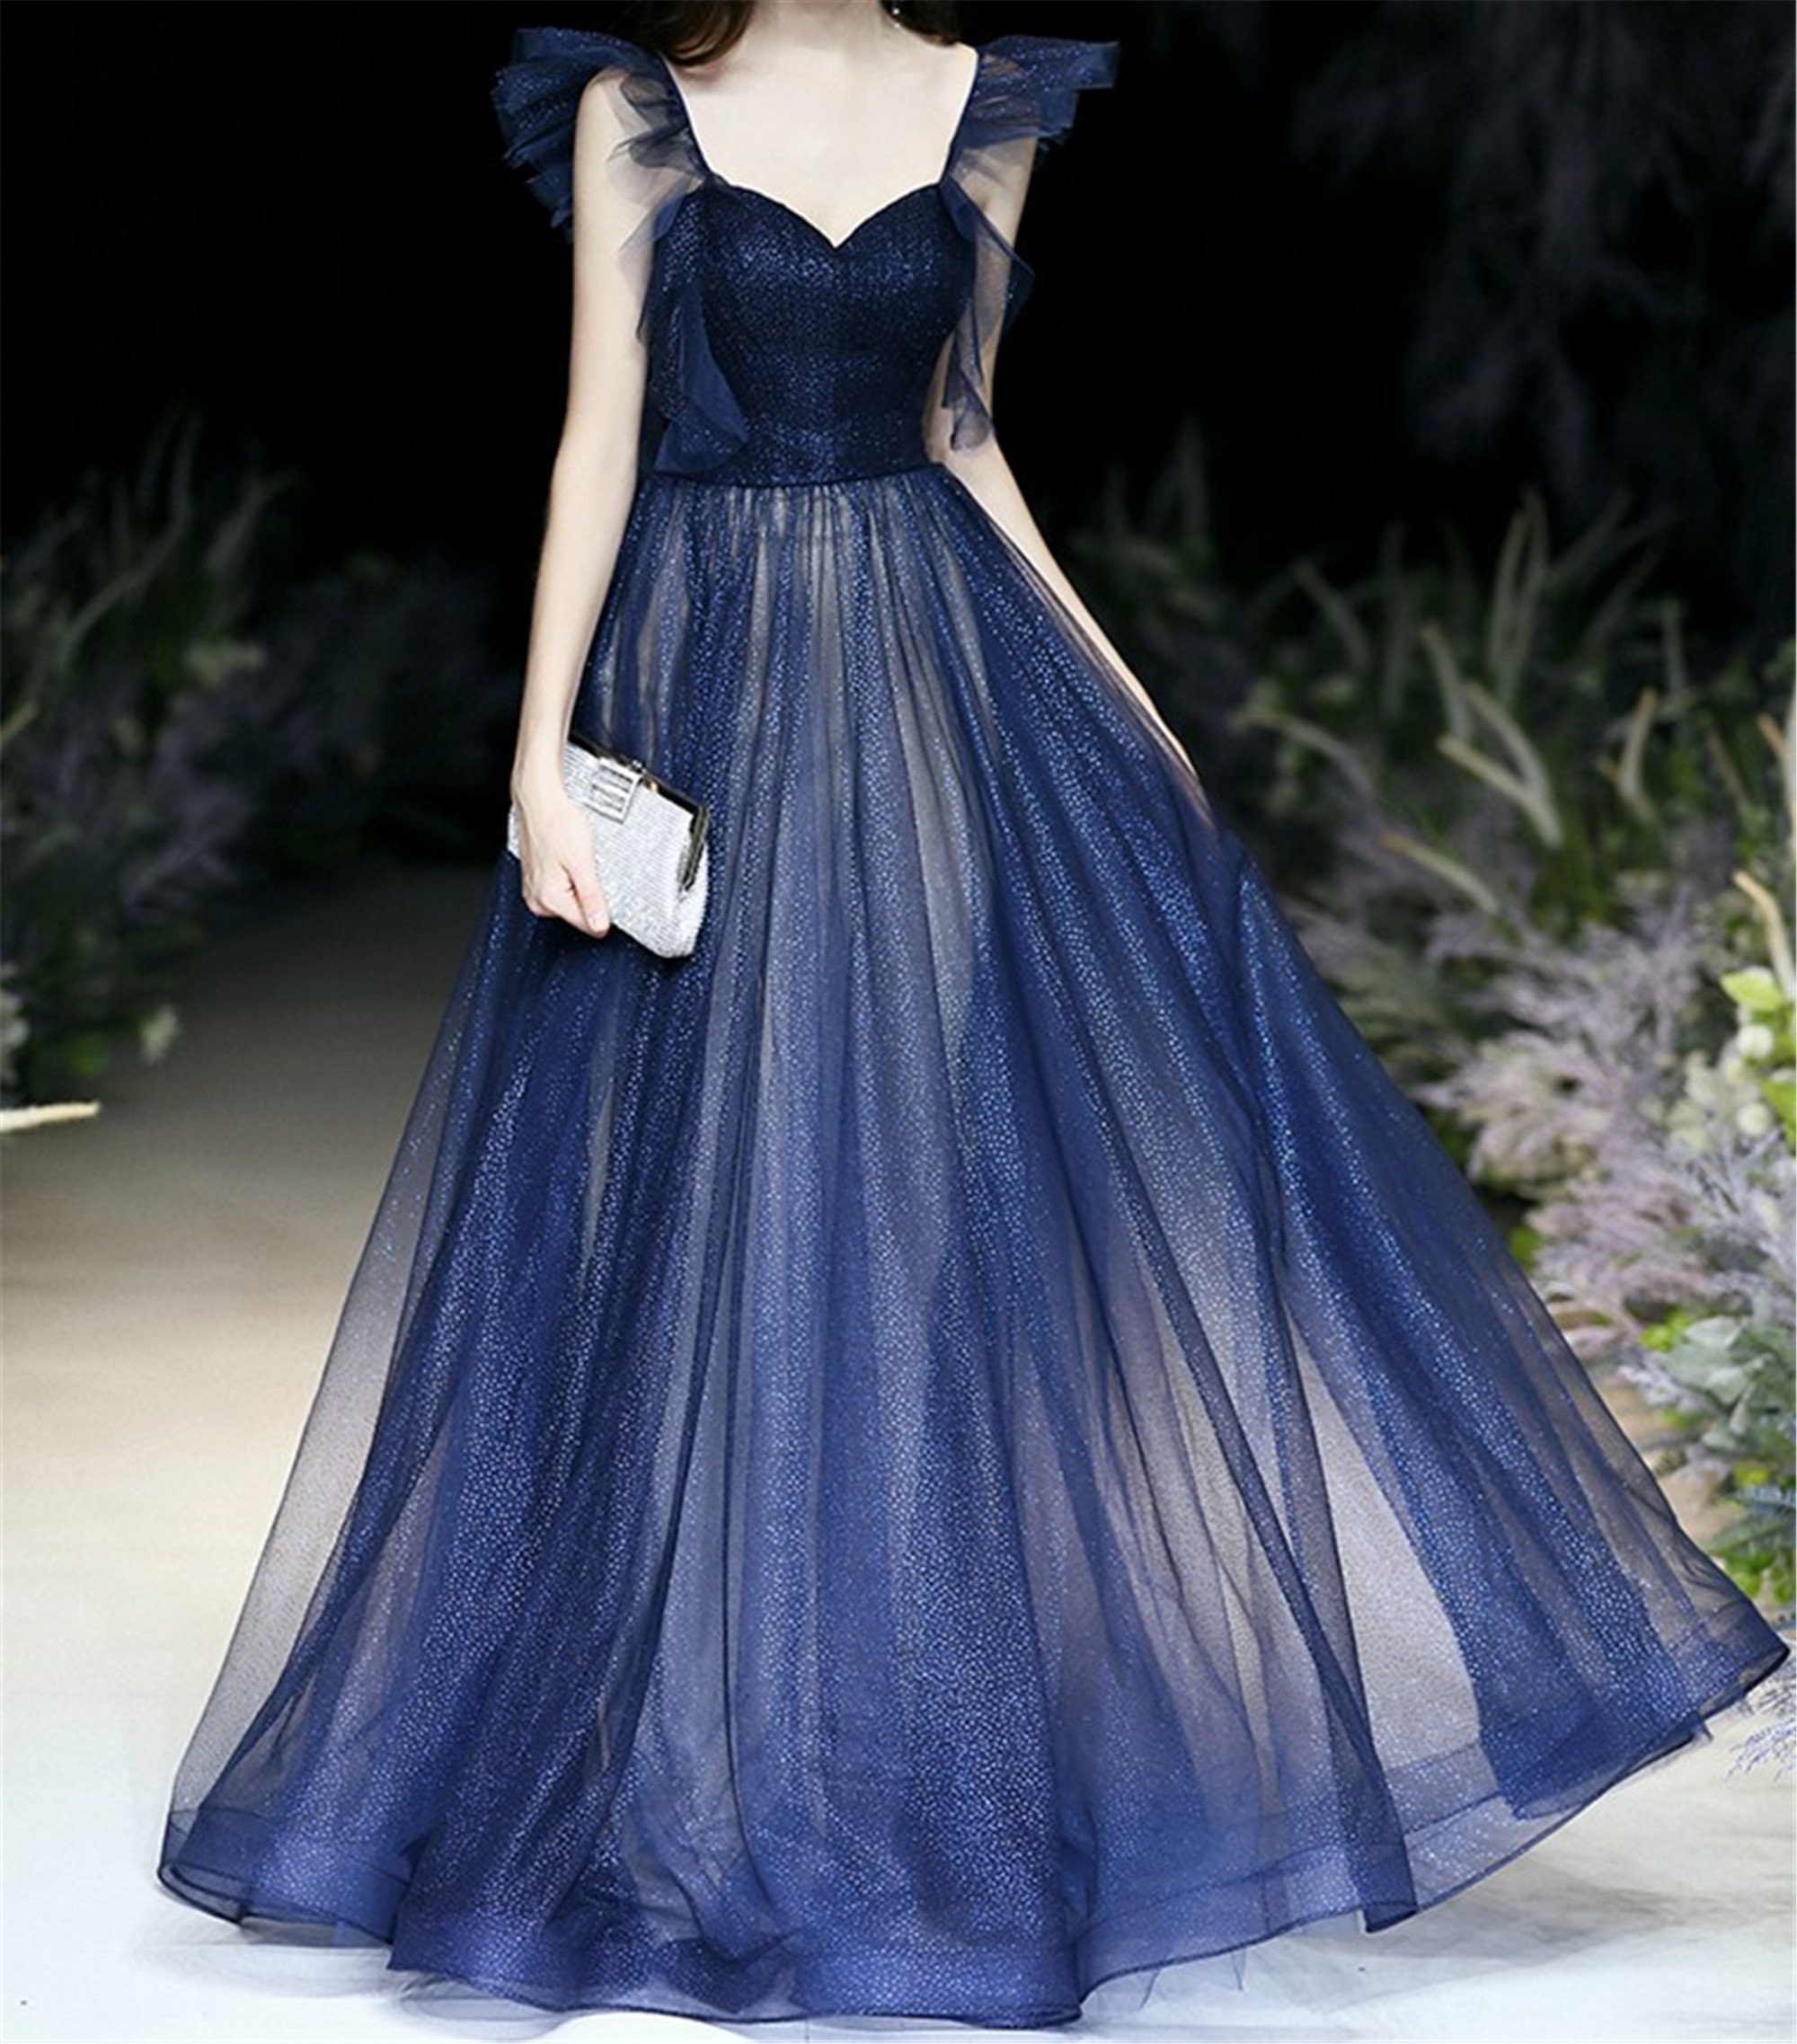 DESIGNER FAUX BLOOMING navy blue gown